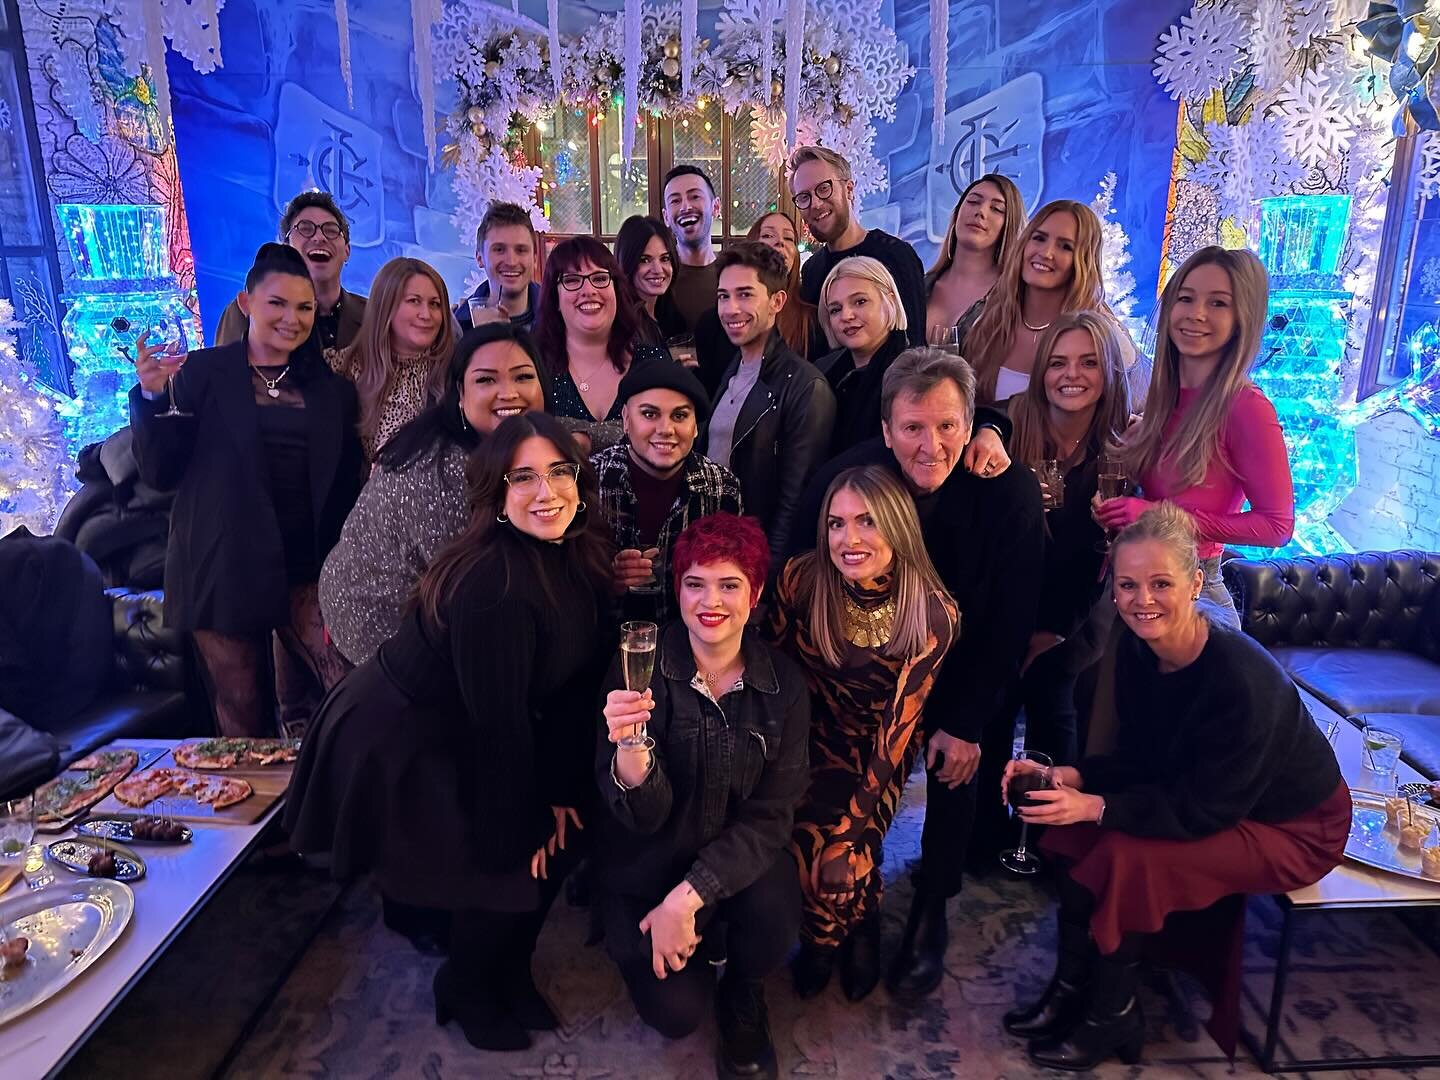 Embracing the festive spirit with gratitude, glam, and our amazing TWS crew (missing a few, but always in spirit)! Proud of what we've achieved and excited to shine even brighter in the year ahead. ✨🥂